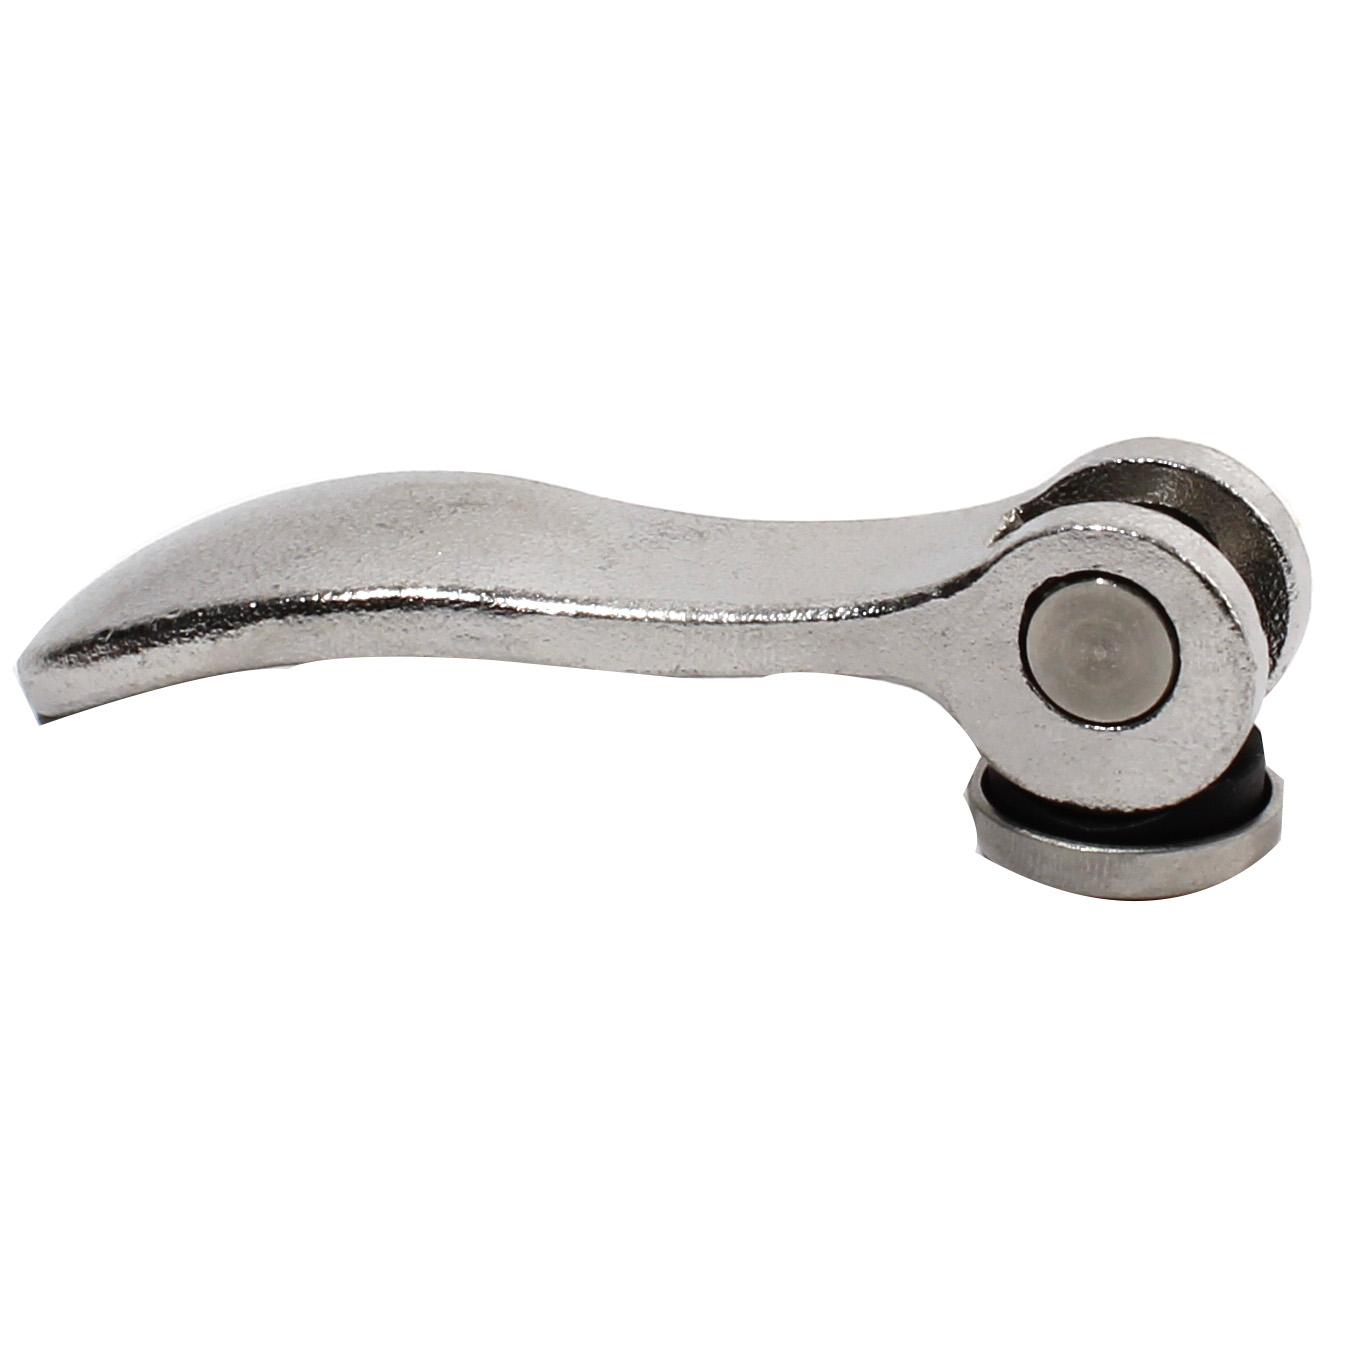 Stainless steel cam lever - Female - threaded hole - 